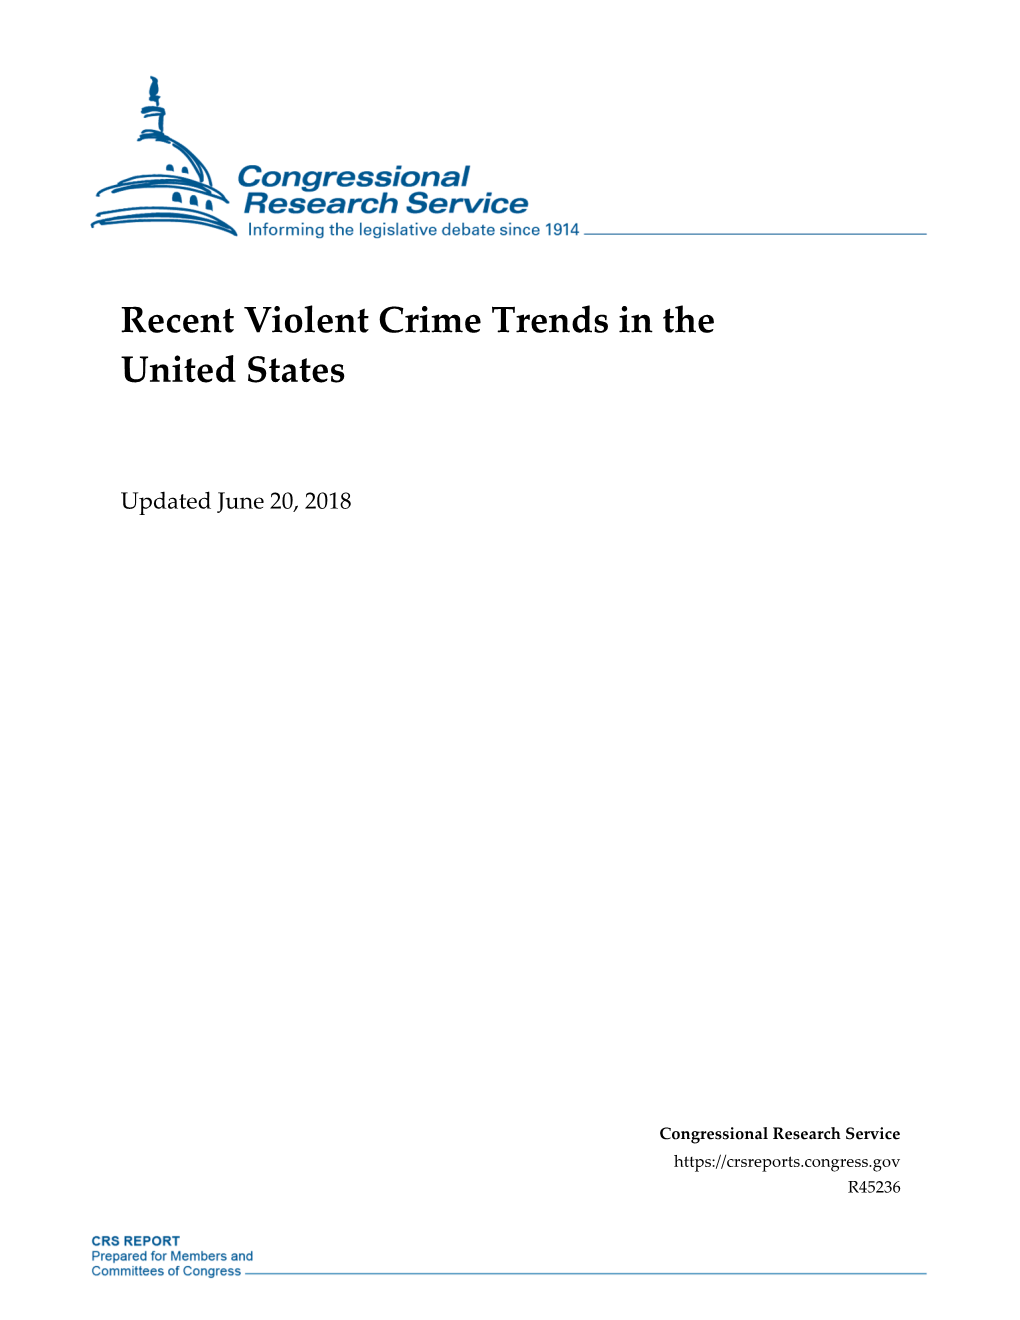 Recent Violent Crime Trends in the United States